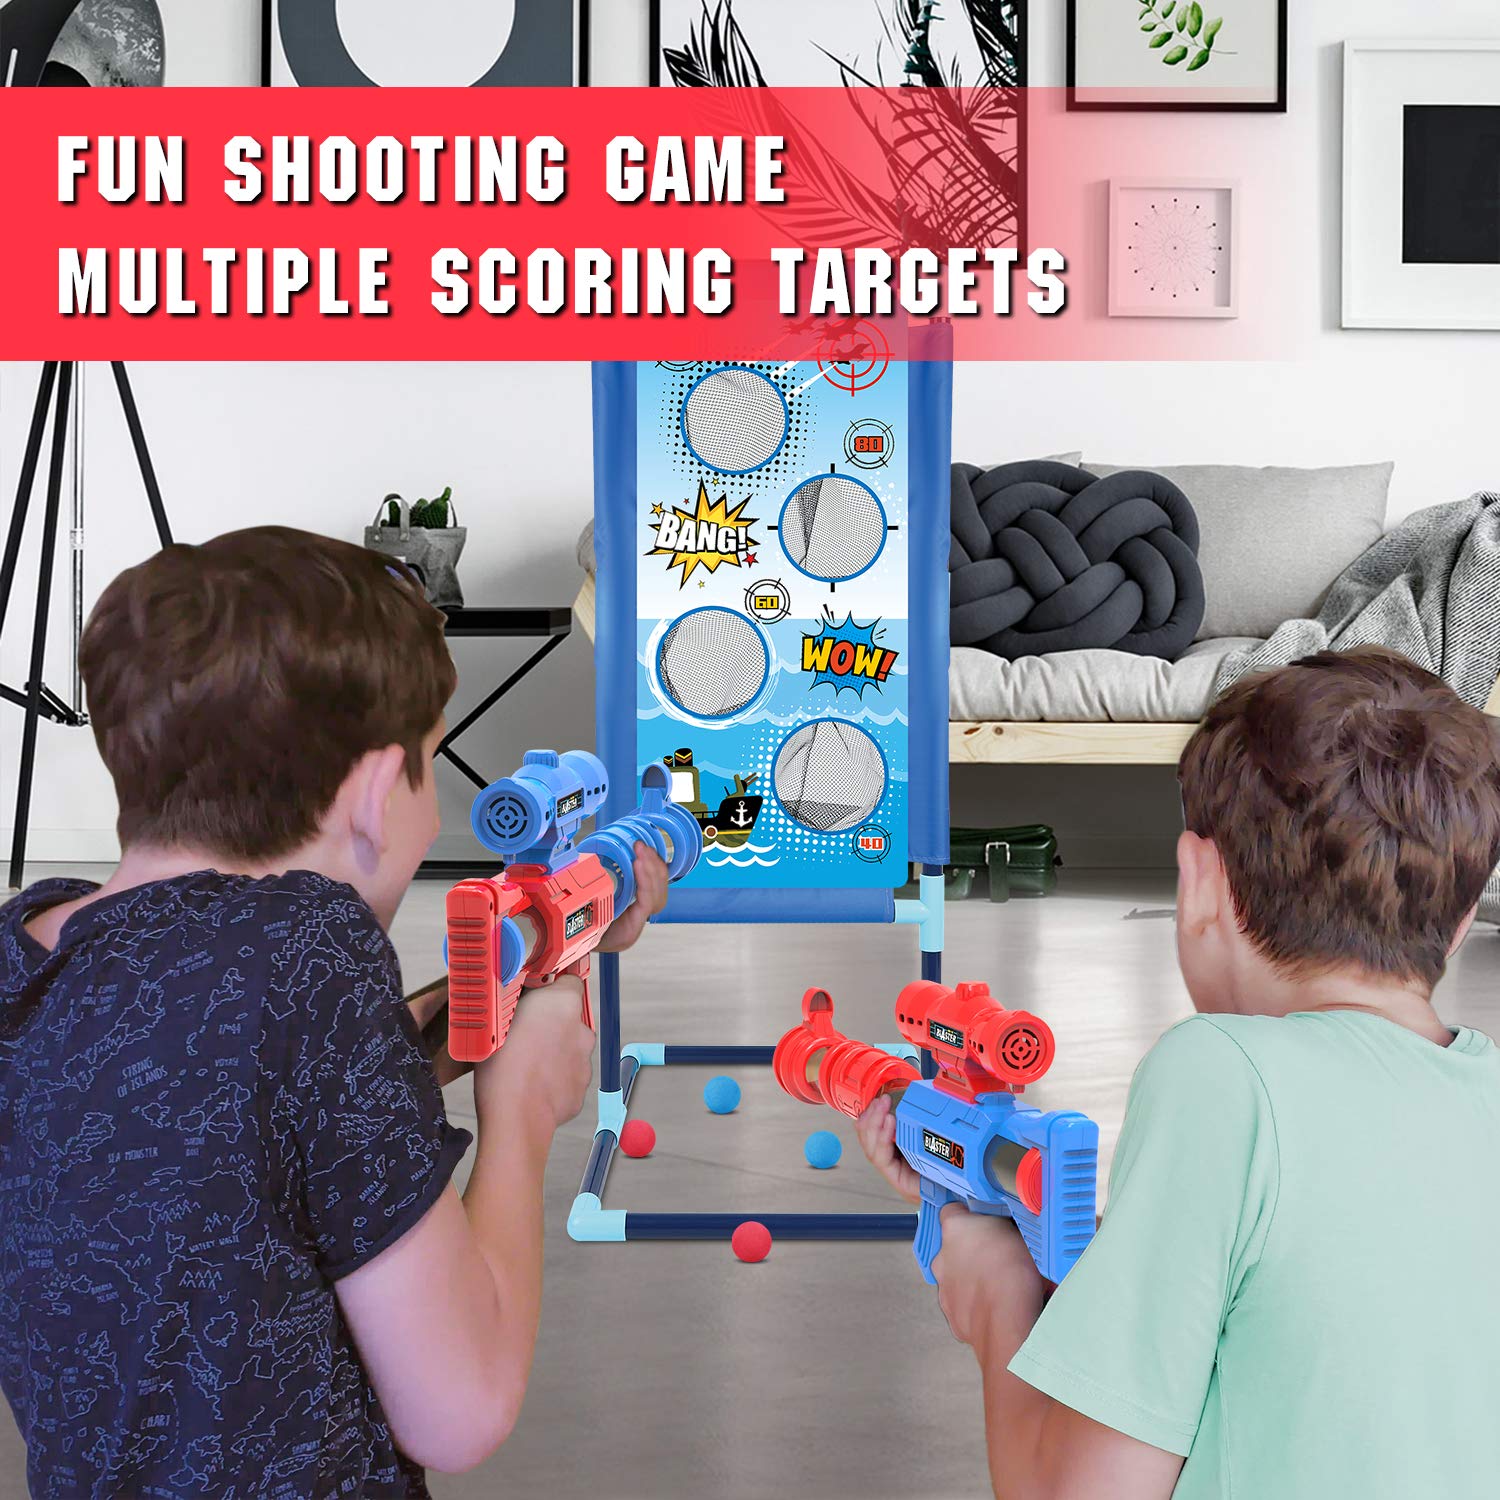 YEEBAY Shooting Game Toy for Age 6, 7, 8,9,10+ Years Old Kids, Boys - 2pk Air Guns & Shooting Target & 24 Foam Balls - Ideal Gift - Compatible with Toy Guns